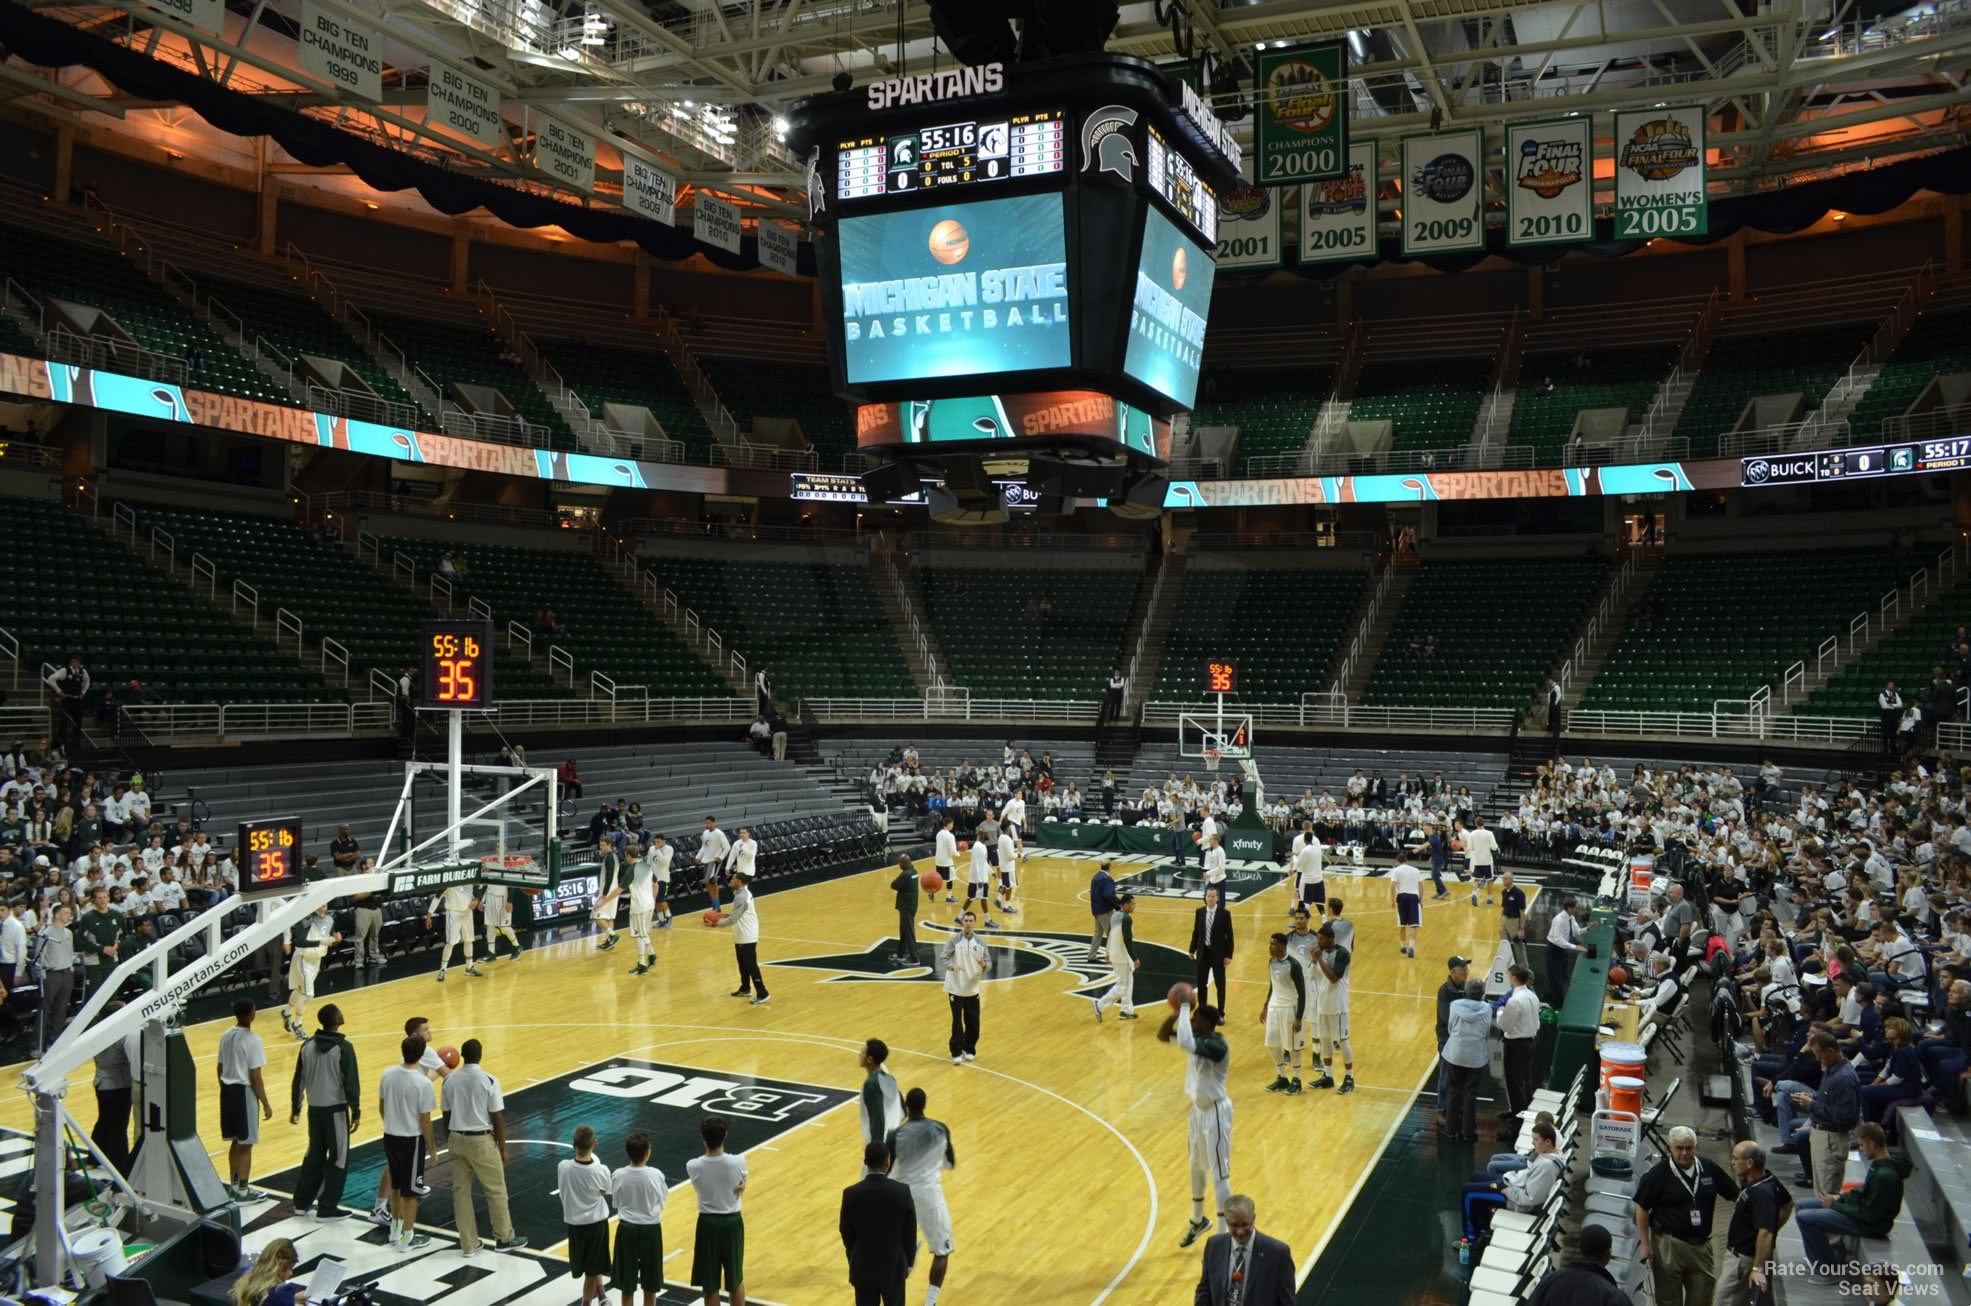 Breslin Center Seating Chart With Rows